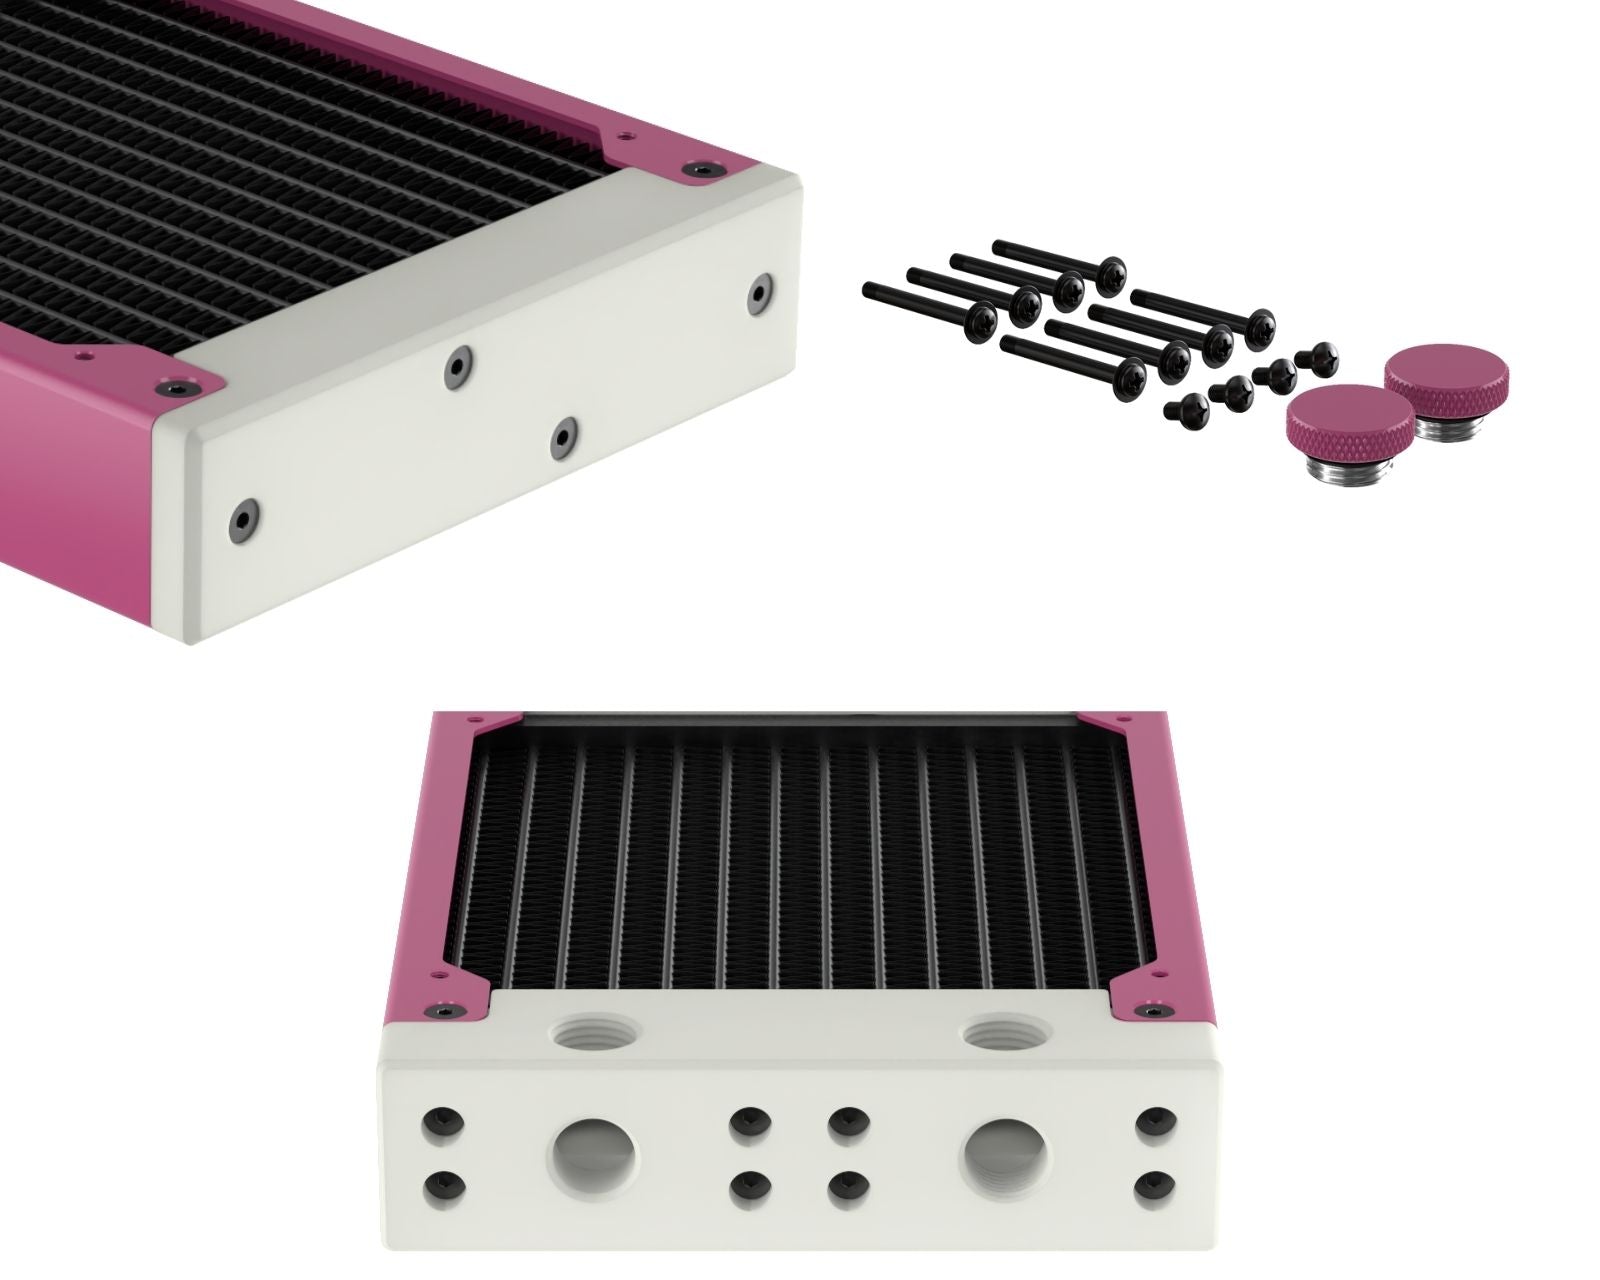 PrimoChill 240SL (30mm) EXIMO Modular Radiator, White POM, 2x120mm, Dual Fan (R-SL-W24) Available in 20+ Colors, Assembled in USA and Custom Watercooling Loop Ready - Magenta